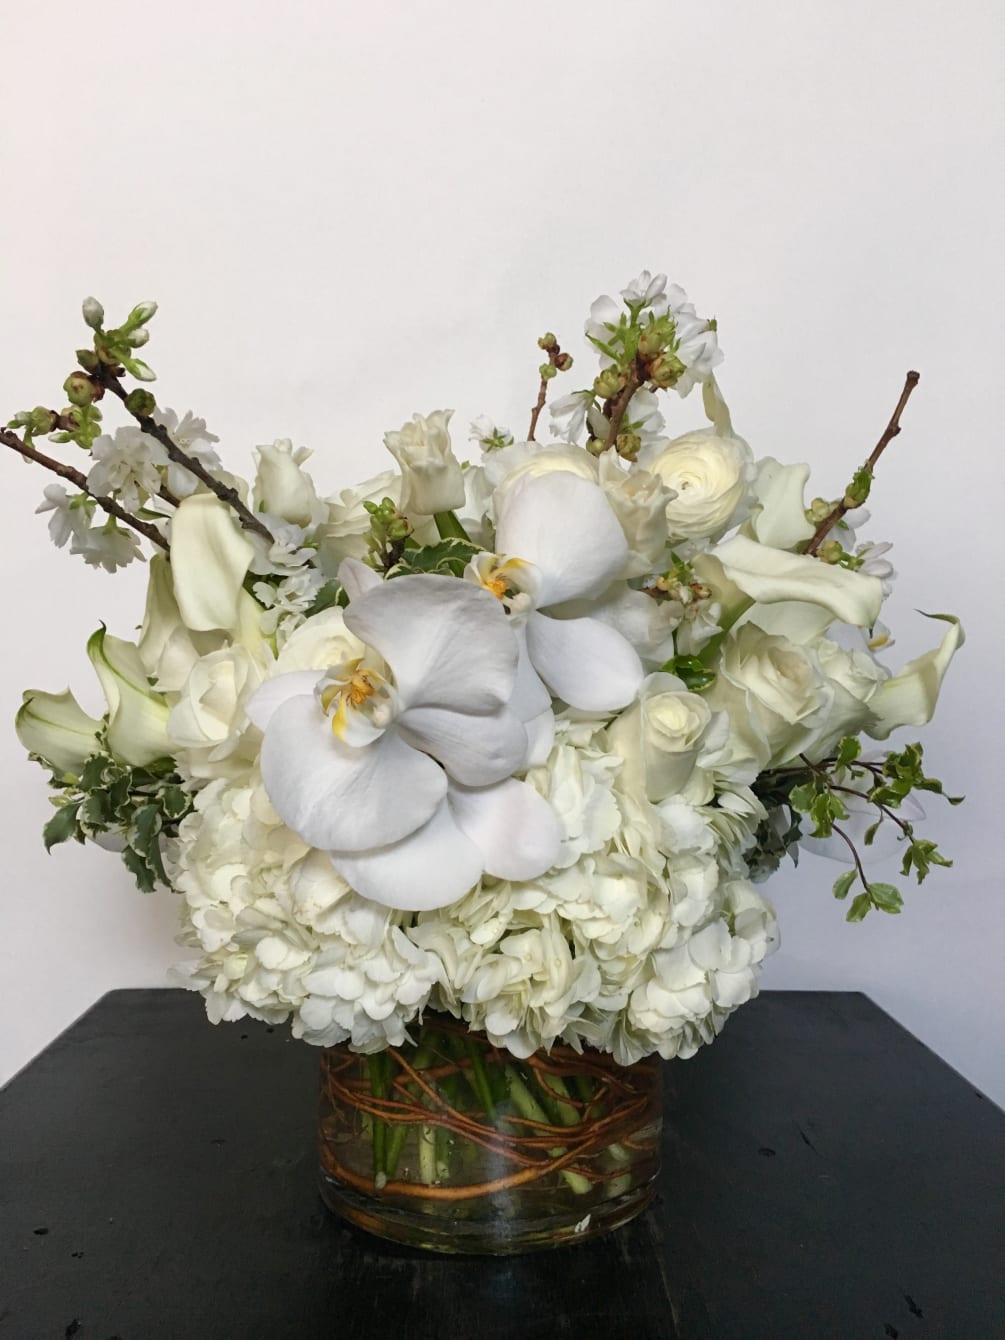 Lush arrangement of seasonal white flowers and blooming branches all based on